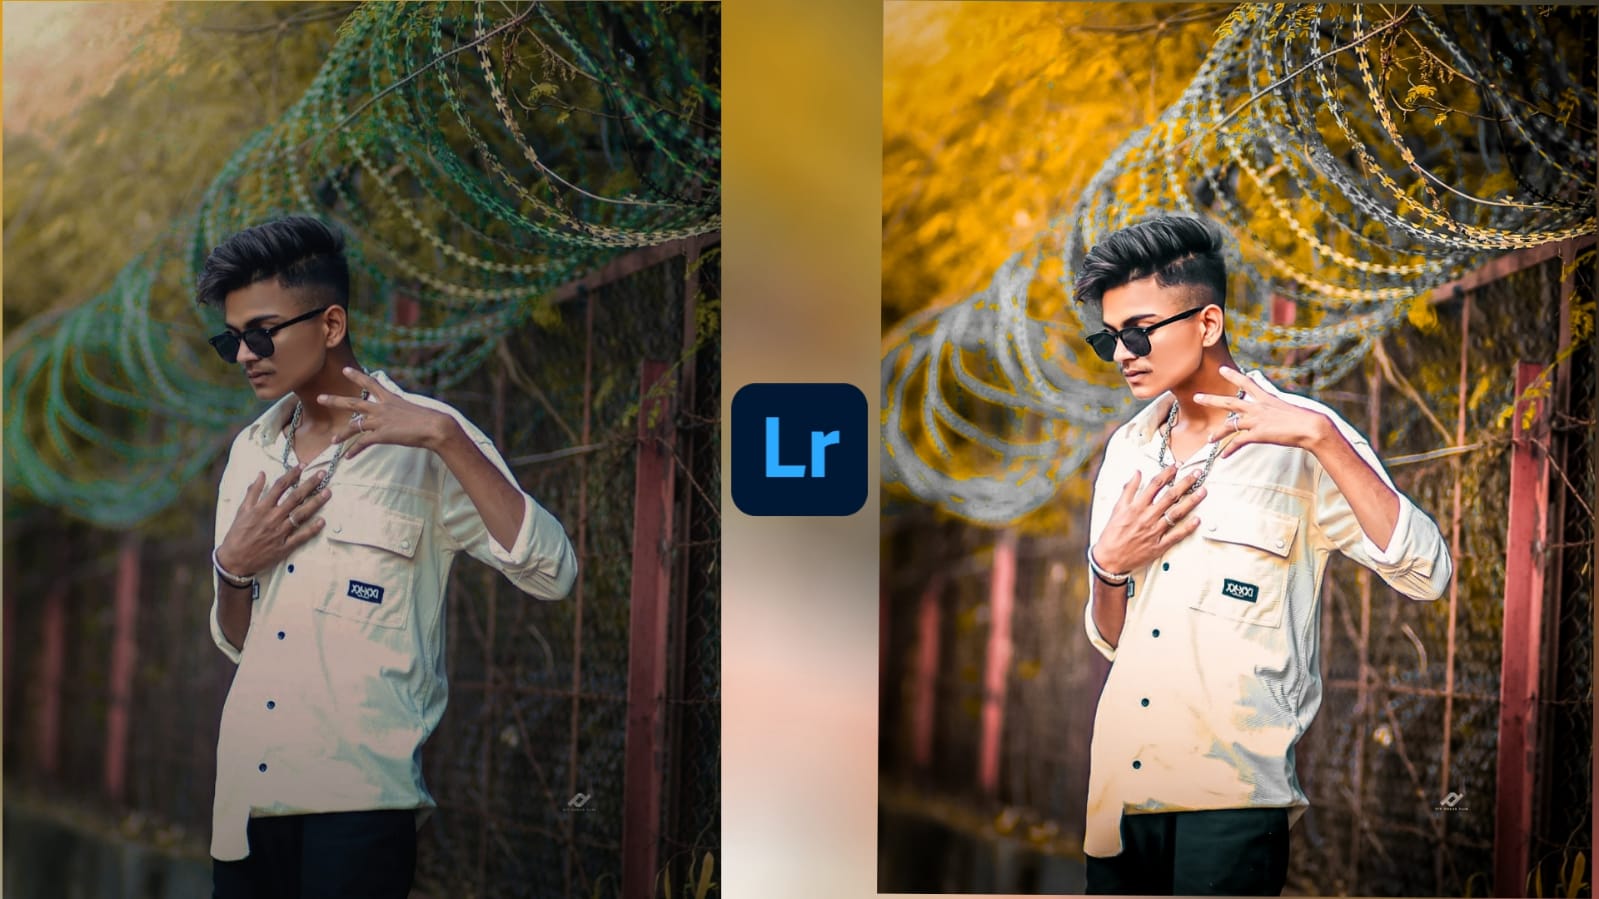 lightroom presets free download lime yellow and dark effect free lr preset download